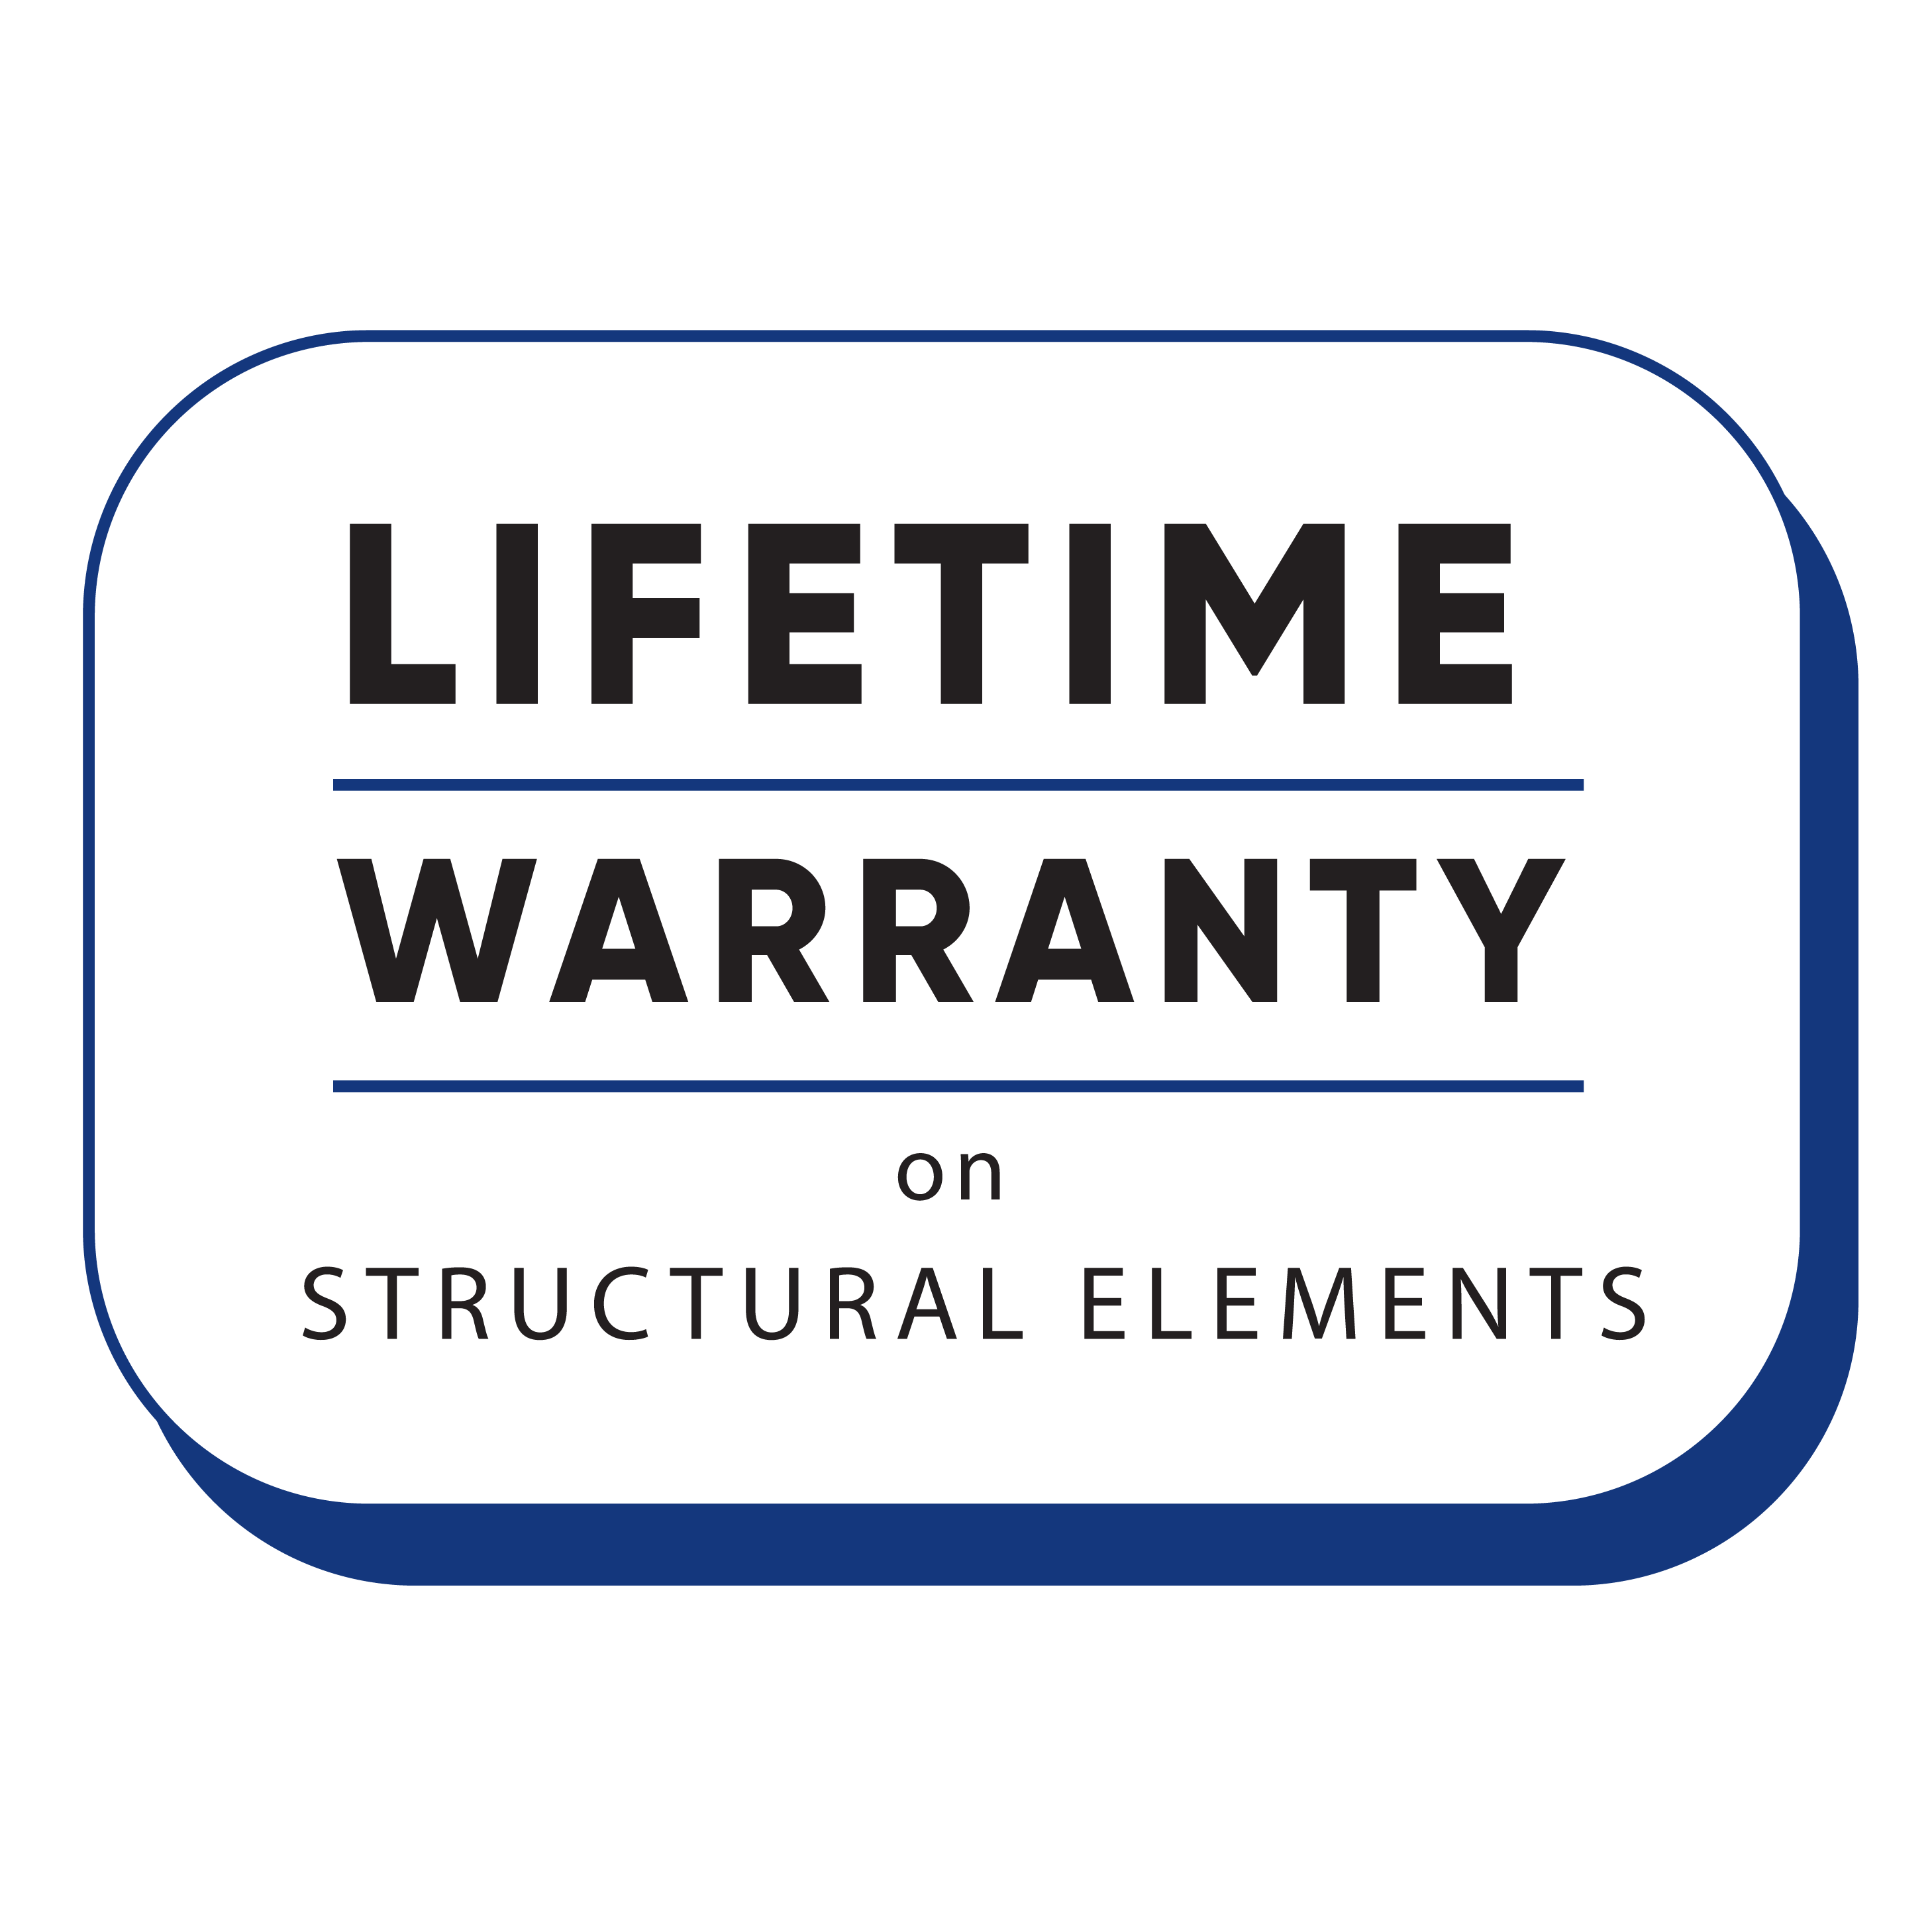 Lifetime warranty on structural elements